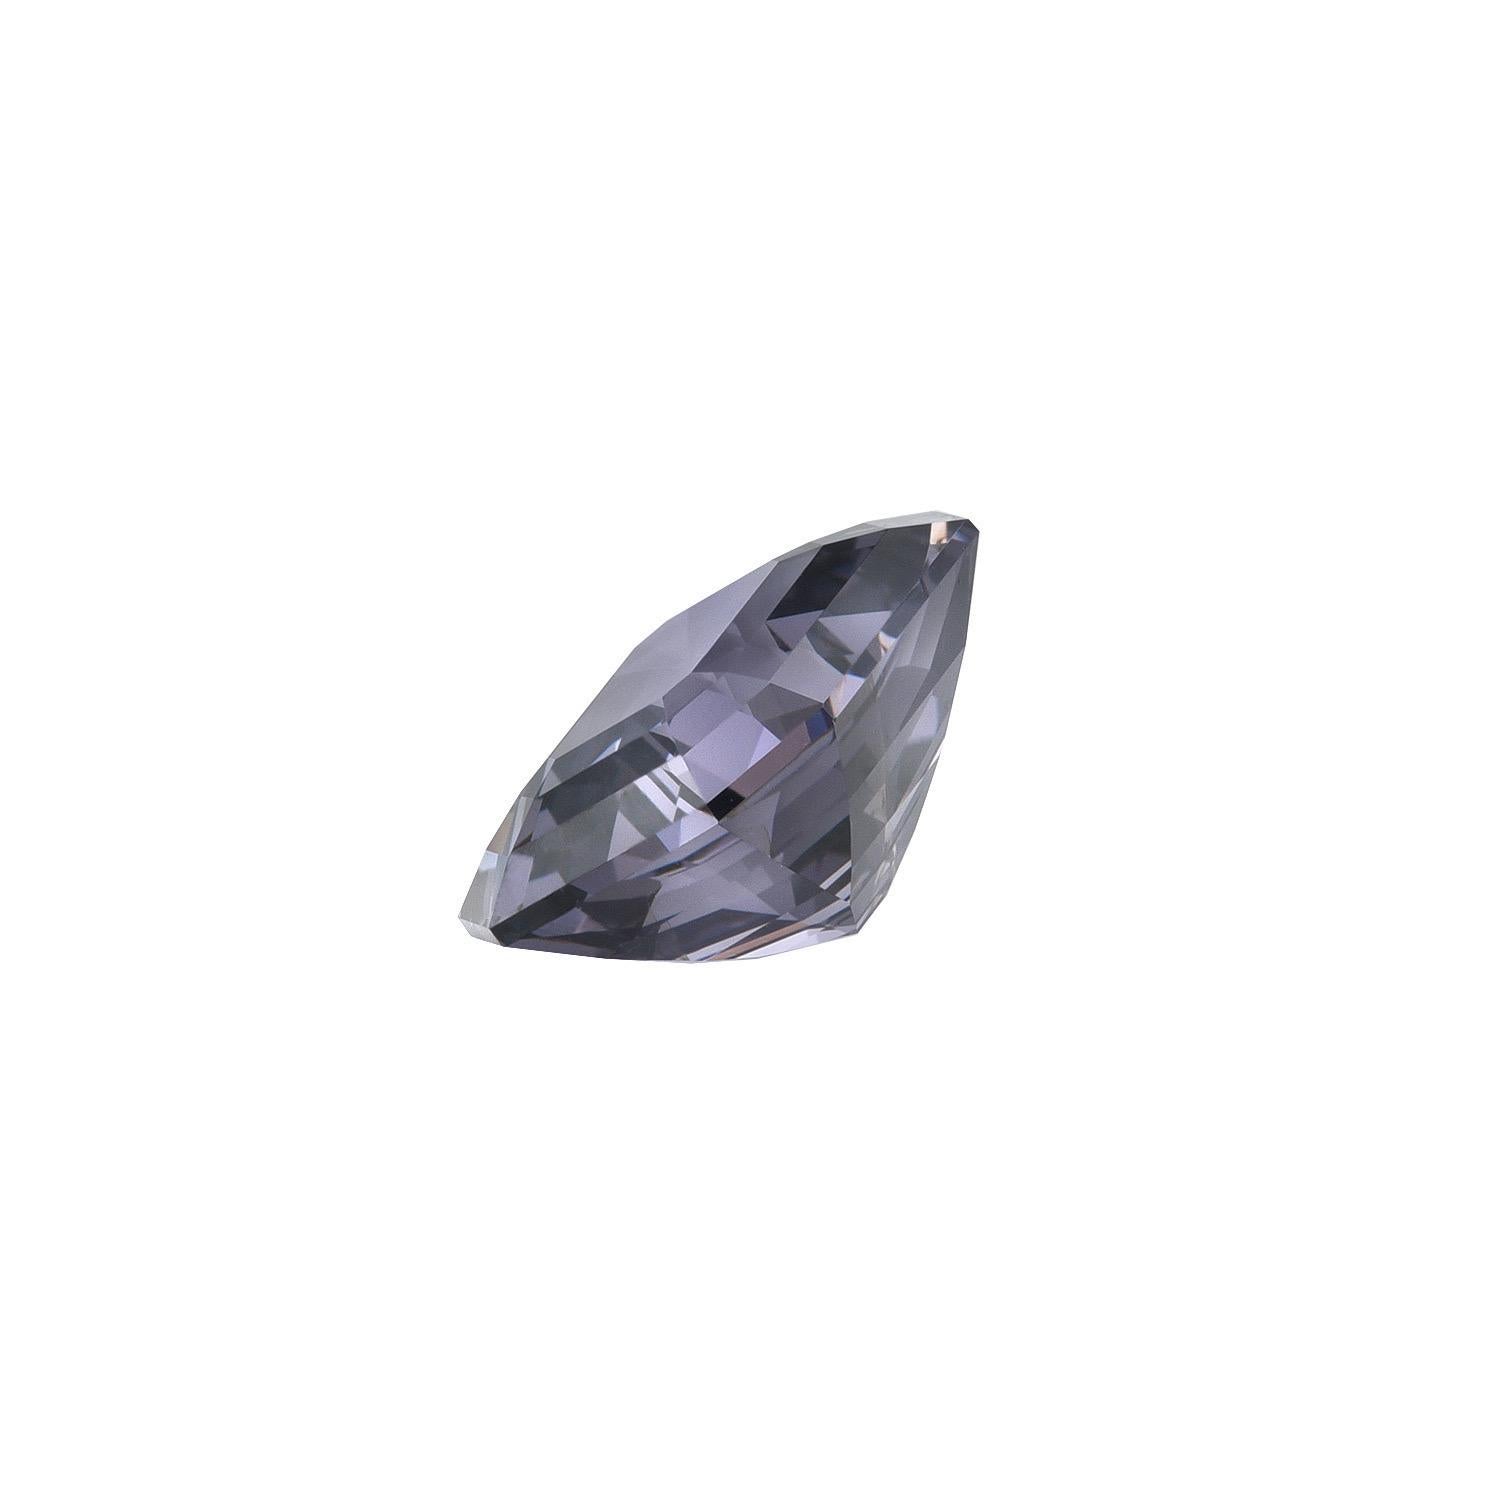 Exclusive 6.18 carat Greyish Violet Spinel emerald cut gem, offered unmounted to a fine gemstone collector.
Returns are accepted and paid by us within 7 days of delivery.
We offer supreme custom jewelry work upon request. Please contact us for more